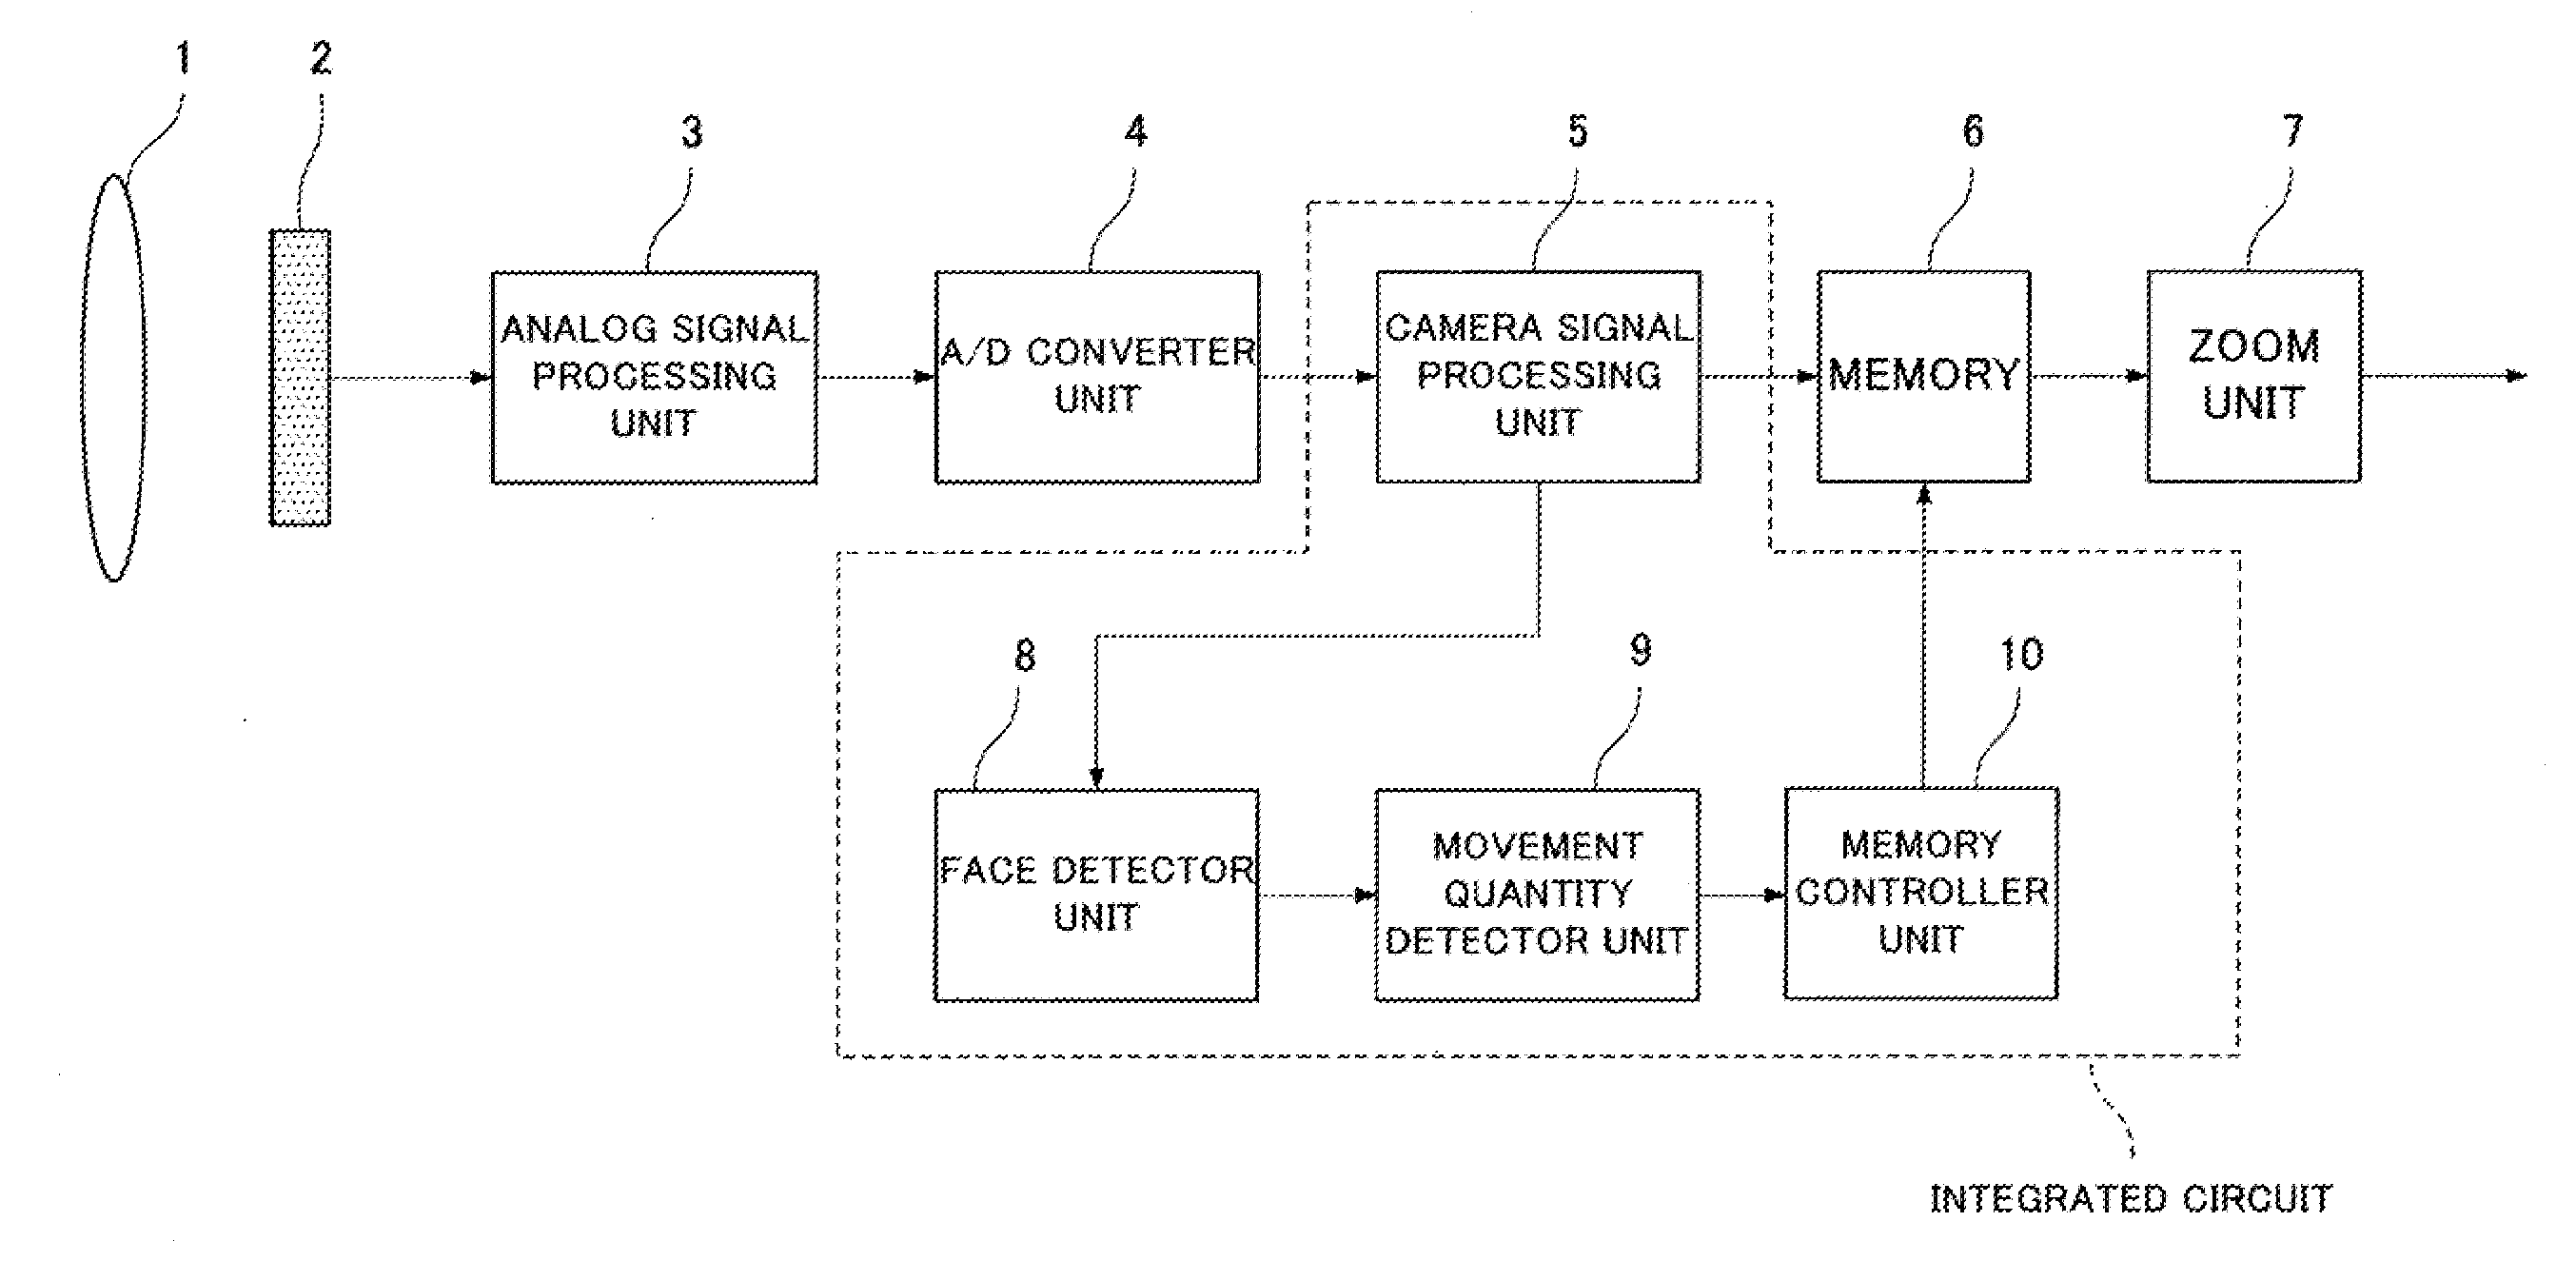 Image capture device and integrated circuit